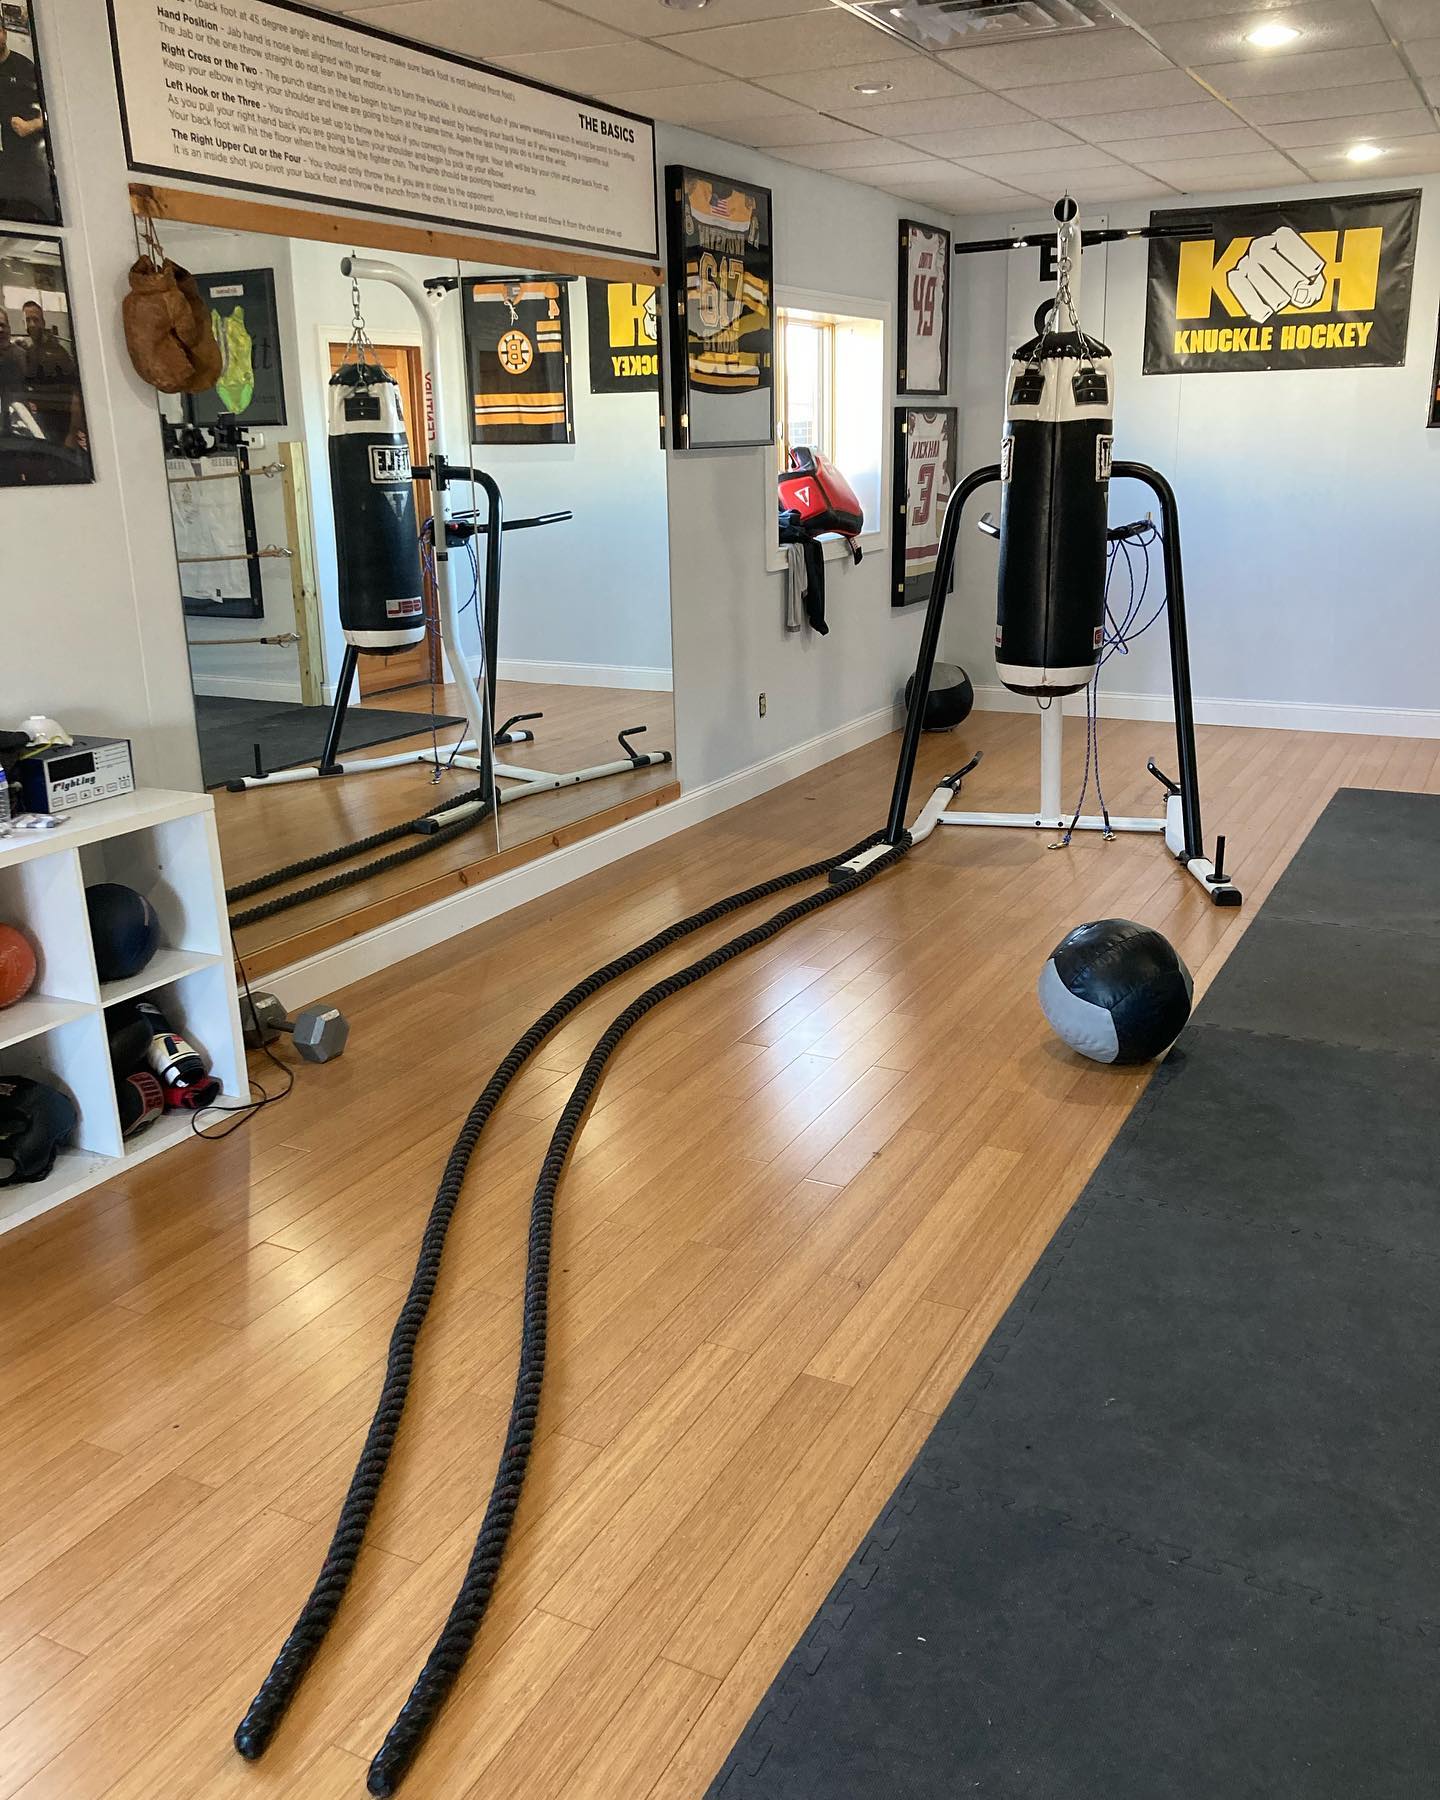 You need a break from those at home workouts or your Peloton . Contact us today to try a free 1-on-1 boxing workout in a safe/clean environment with just you and a boxing trainer . Call/text (781)727-9503 or email fitbox@outlook.com .
.